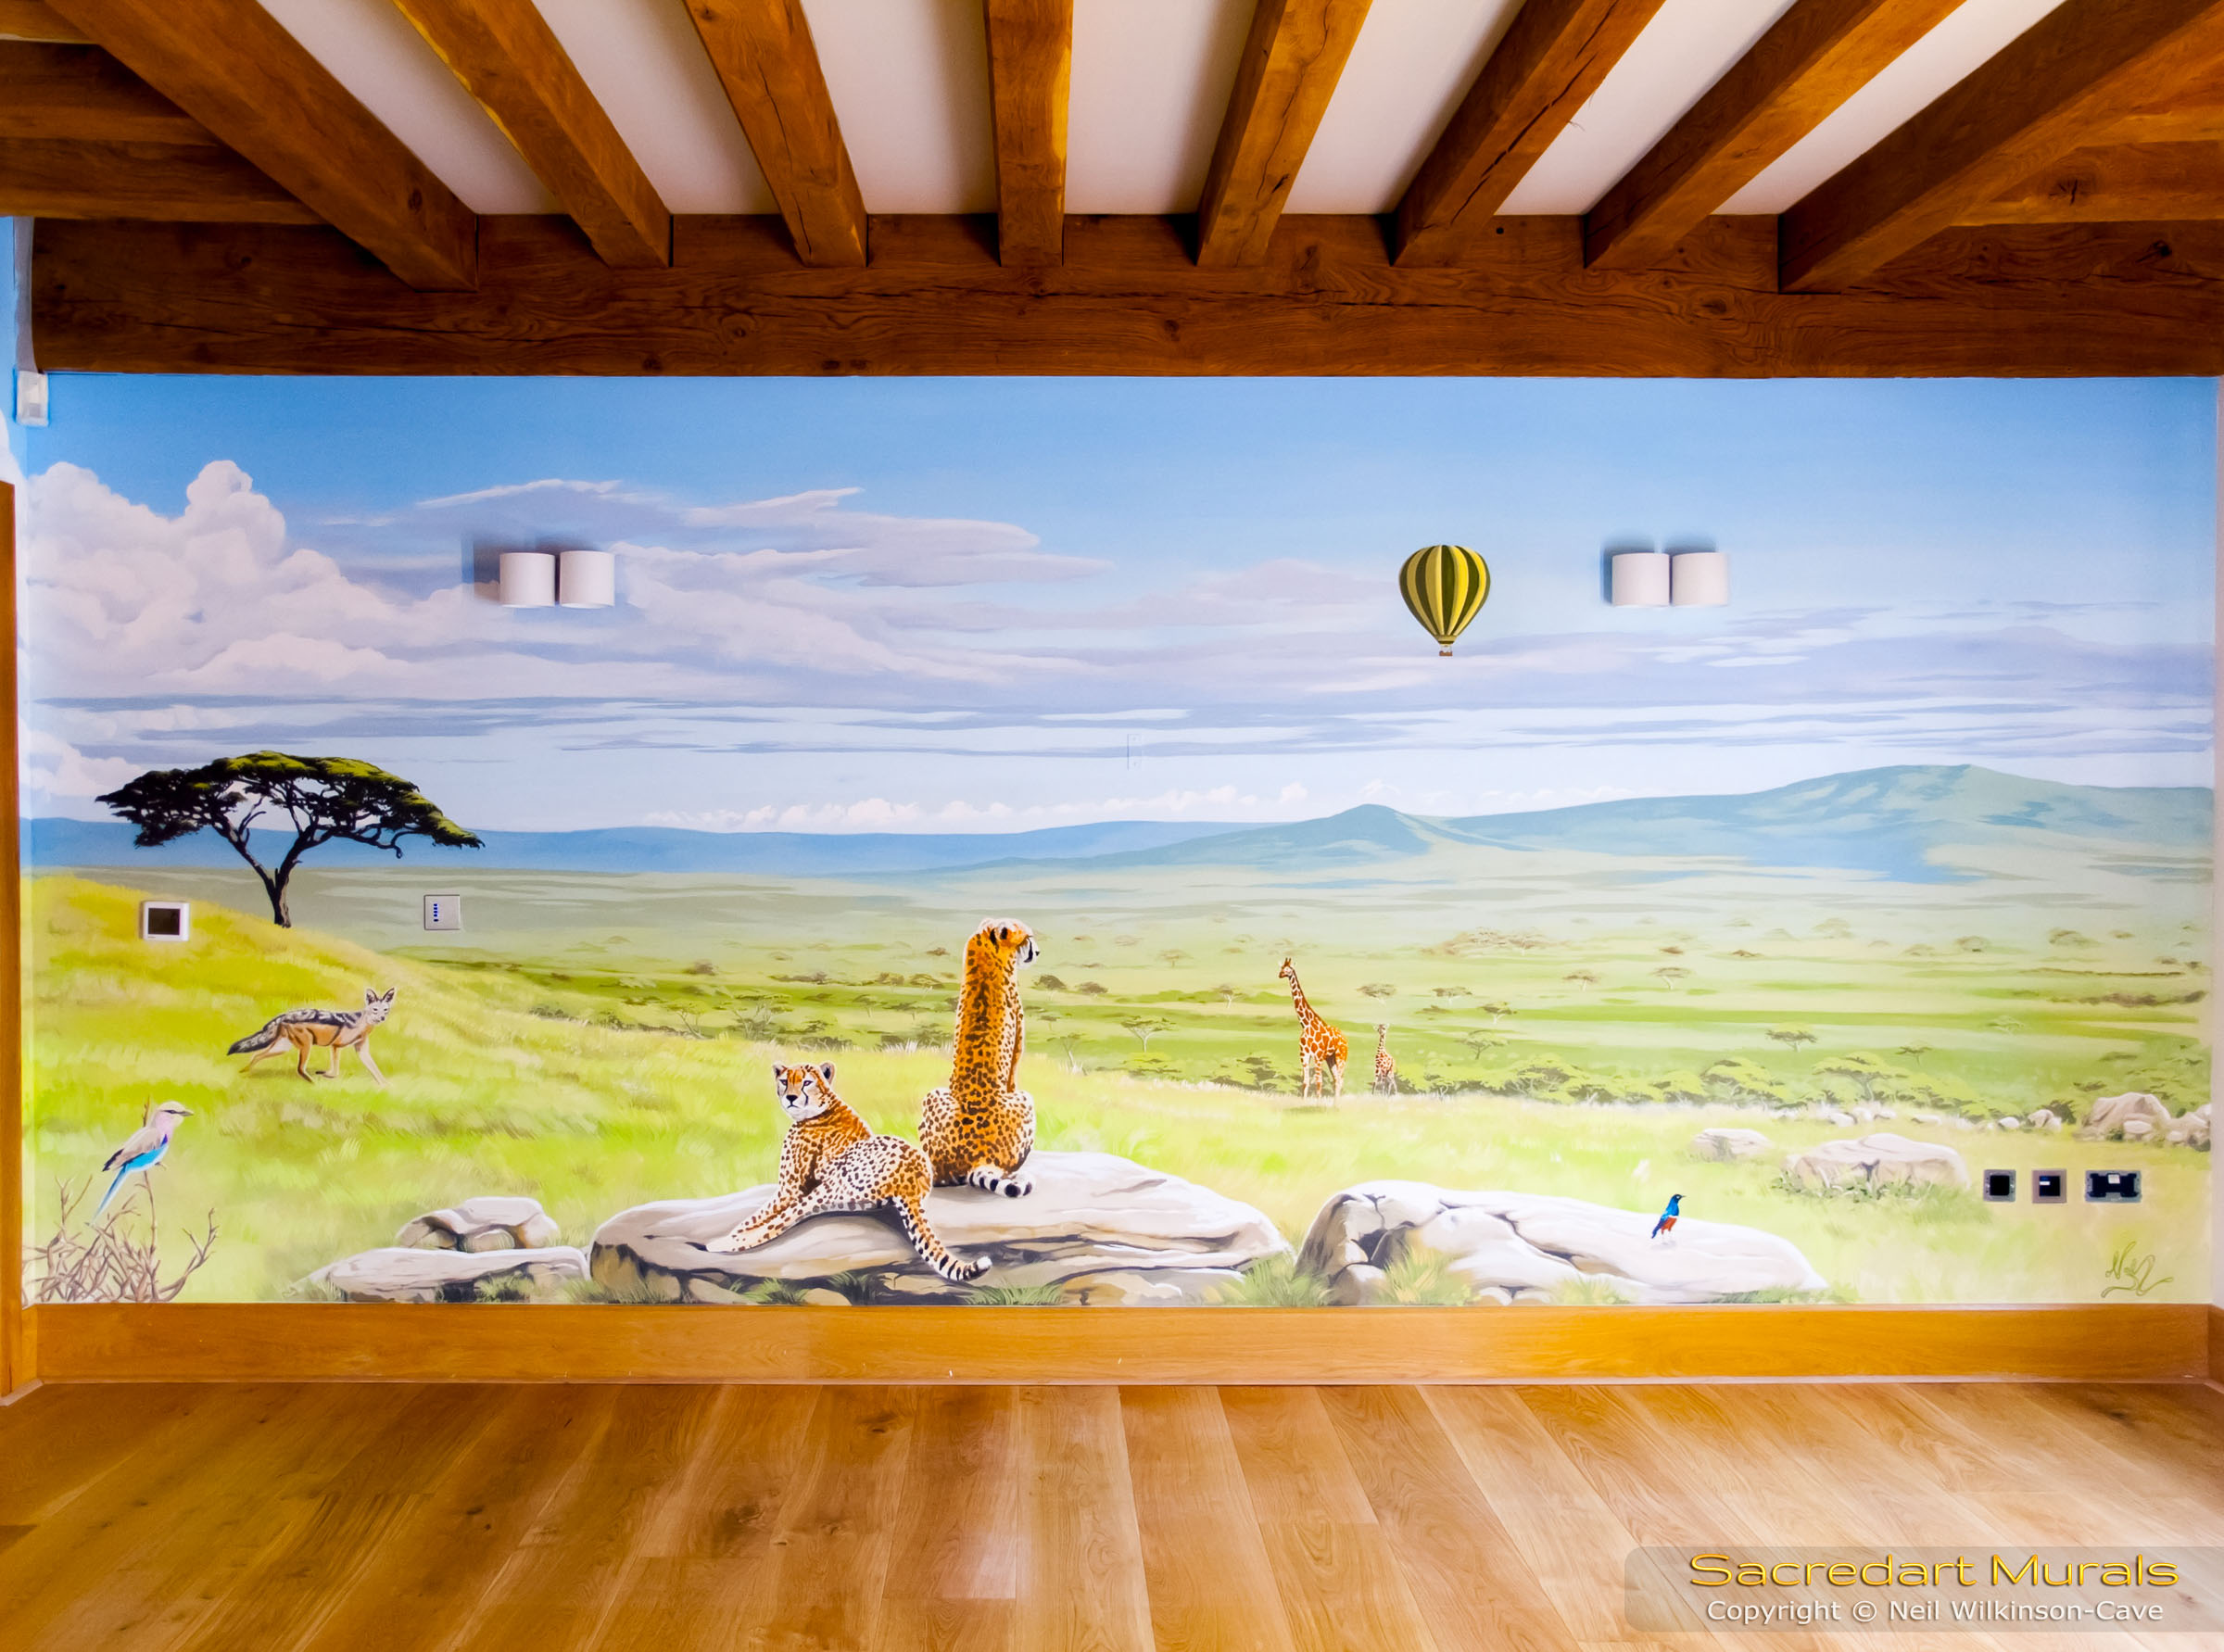 Safari Mural - Showing the right wall with a view looking down from up a hill, towards the Serengeti plains below, with cheetahs sitting on a rock, a jackal, giraffes, some birds and a hot air balloon